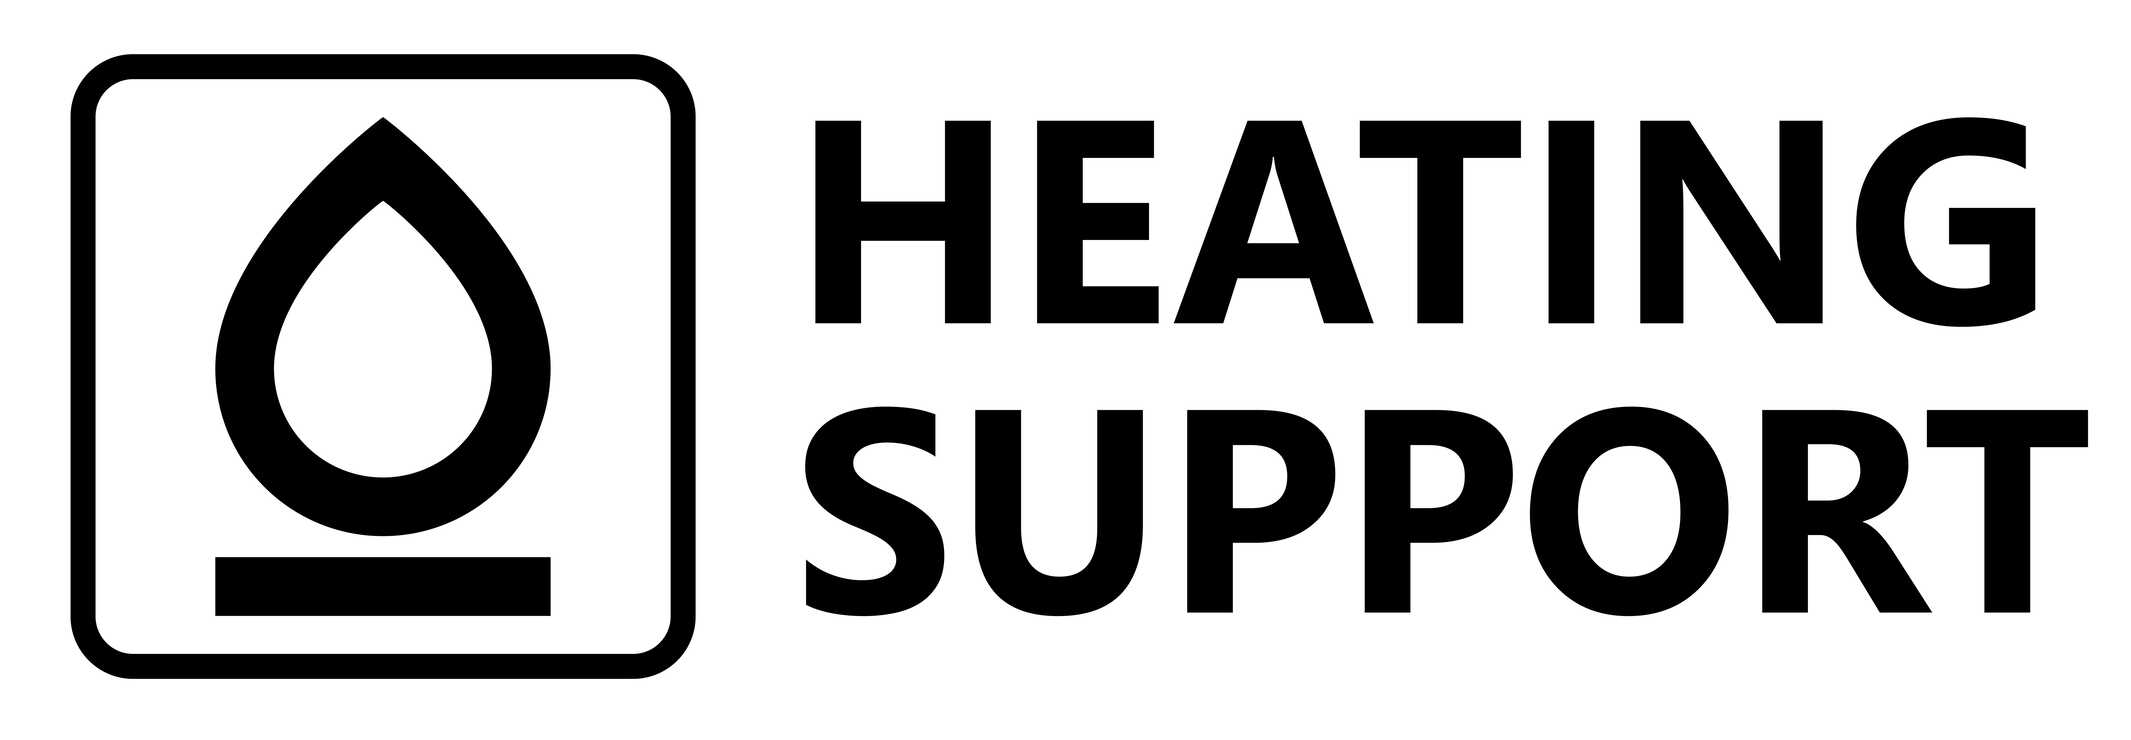 Sponsor - Heating Support | 0152 254 1911 | We're Heating Support, a distributor of Industrial, Commercial & Domestic Boiler and Burner Spares | Suppliers of heating spares, controls & appliances. Over 25,000 products in stock for same day collection or next day delivery